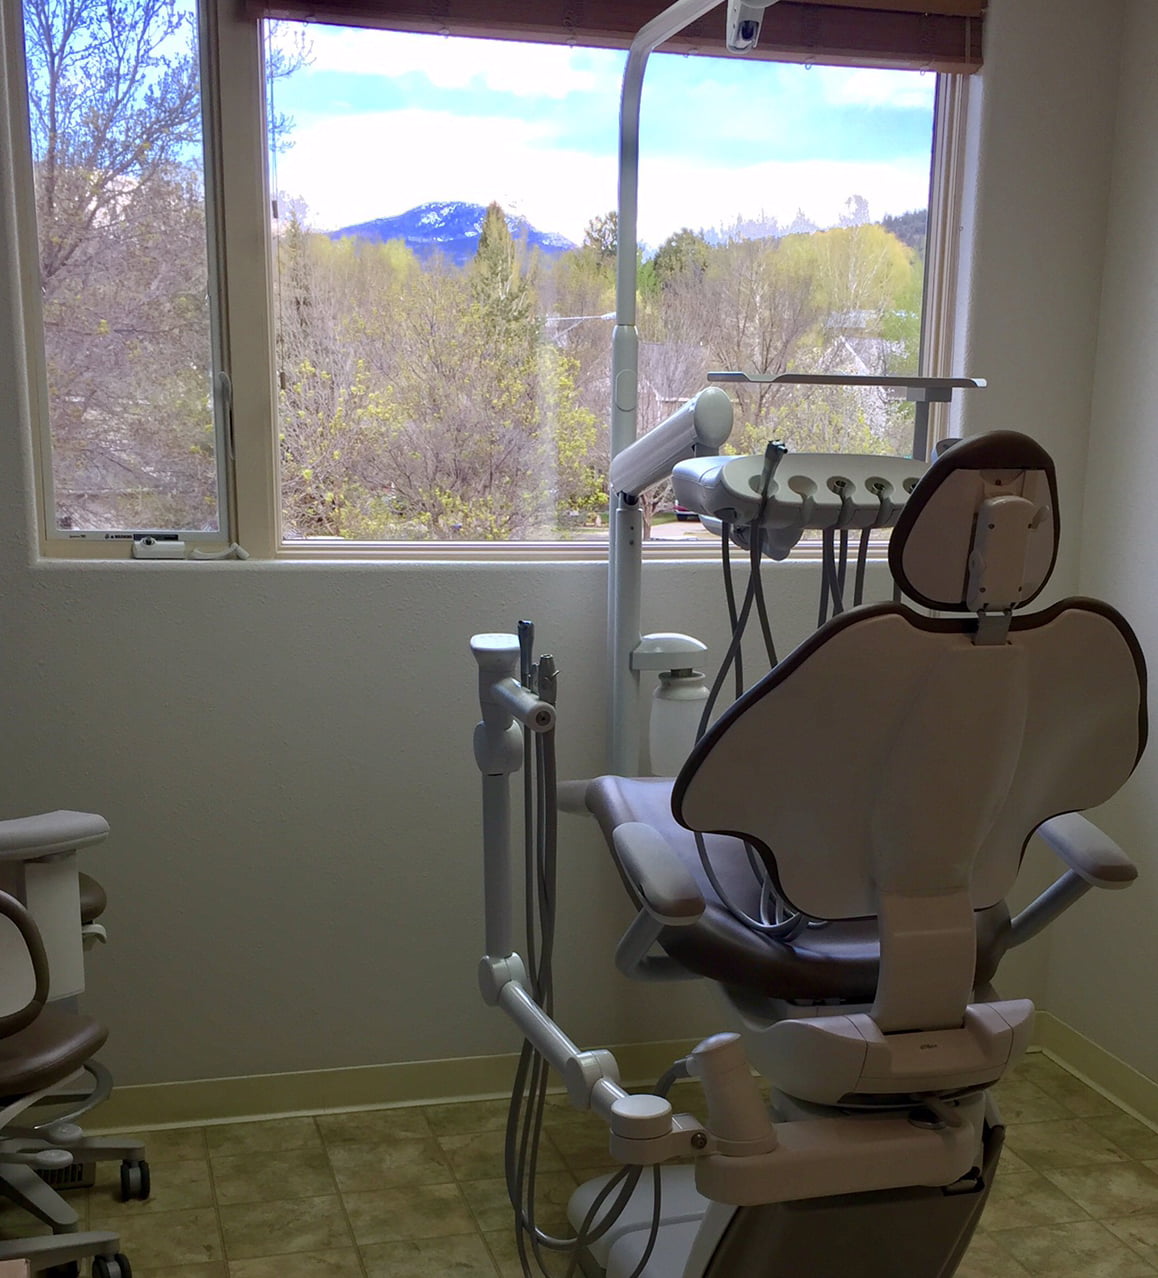 Patient rooms at the Durango Oral Health Clinic have beautiful mountain views.